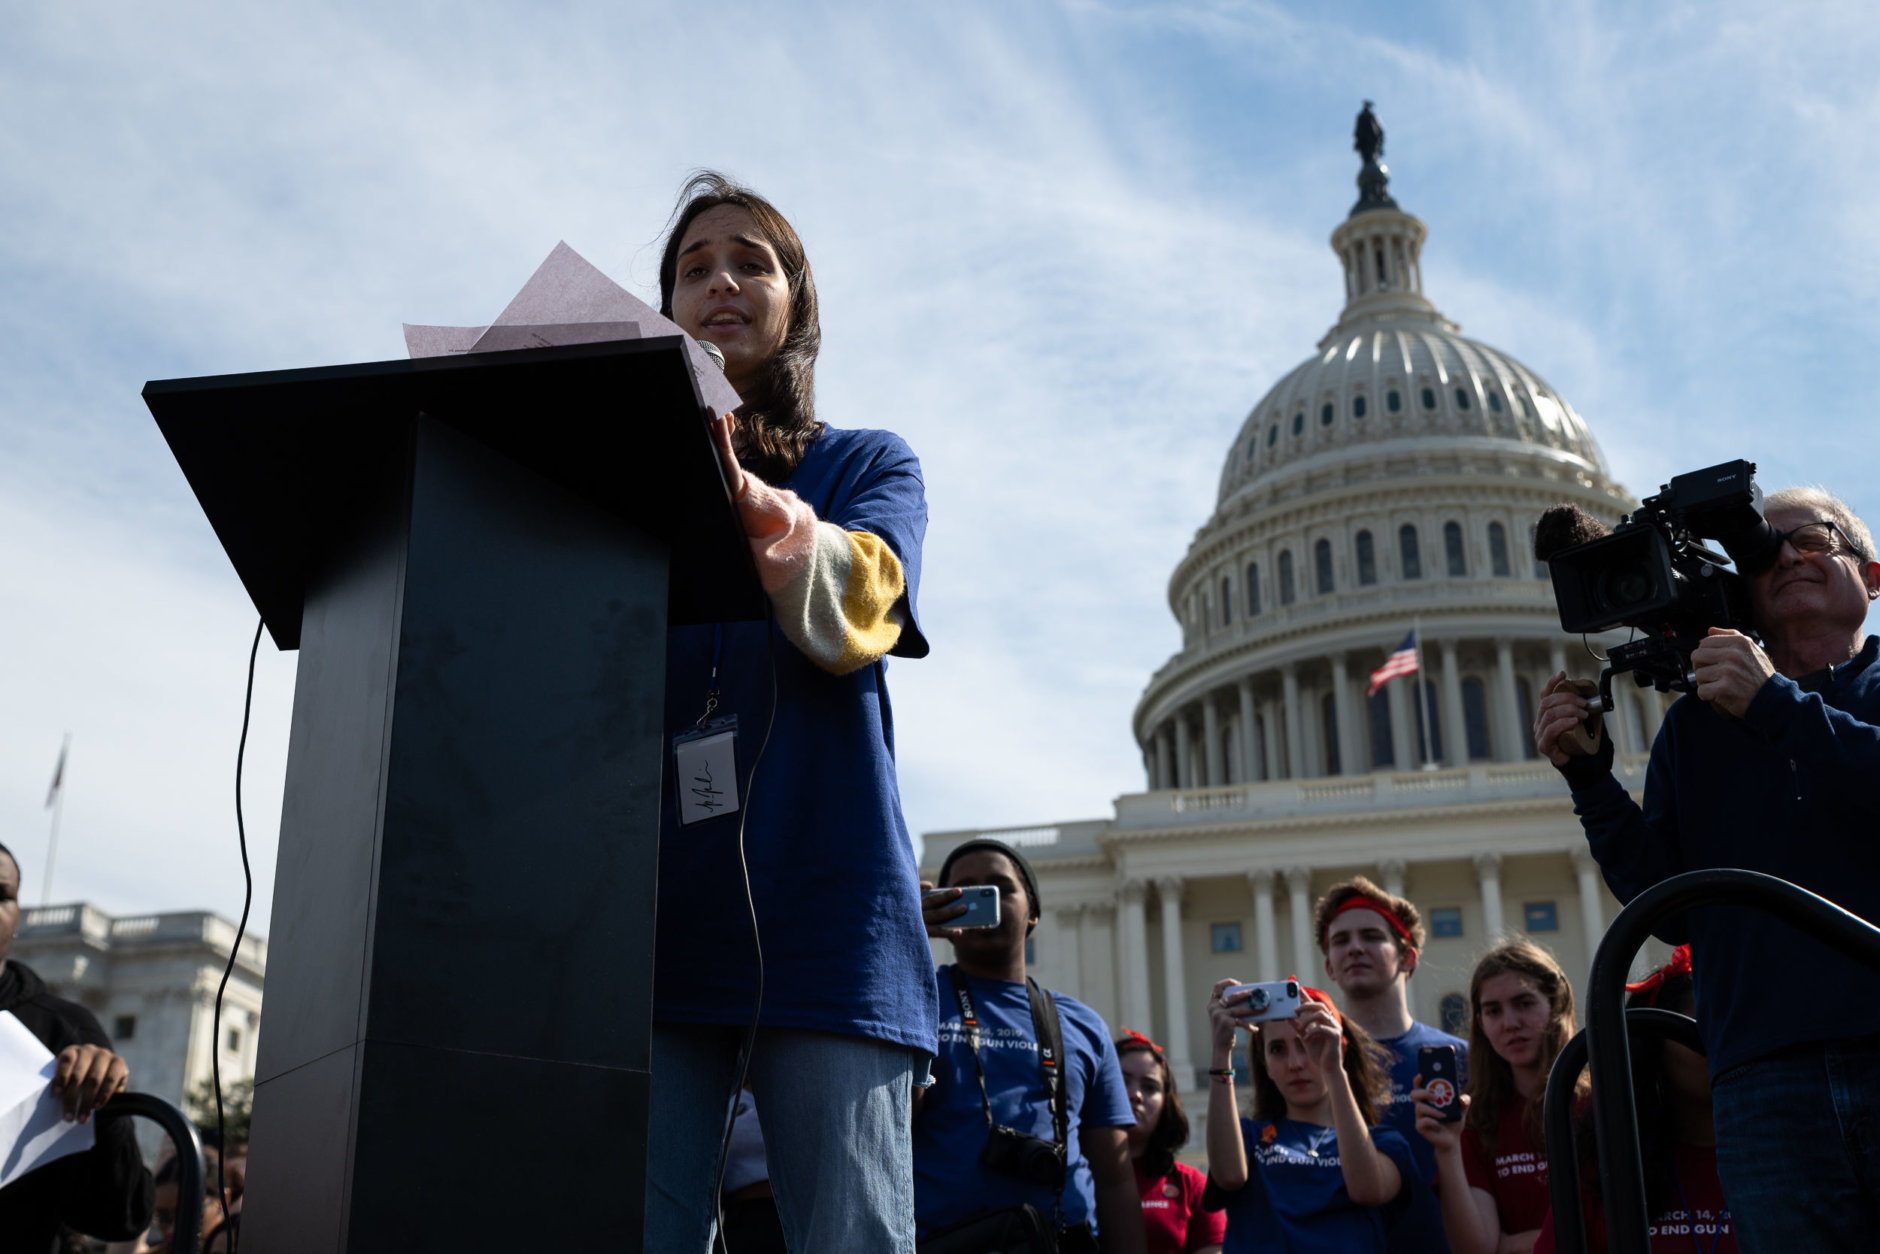 Dani MIller, founder and co-president of MoCo Students for Change, addresses students outside the Capitol after a mass walkout from classes on Thursday. (WTOP/Alejandro Alvarez)